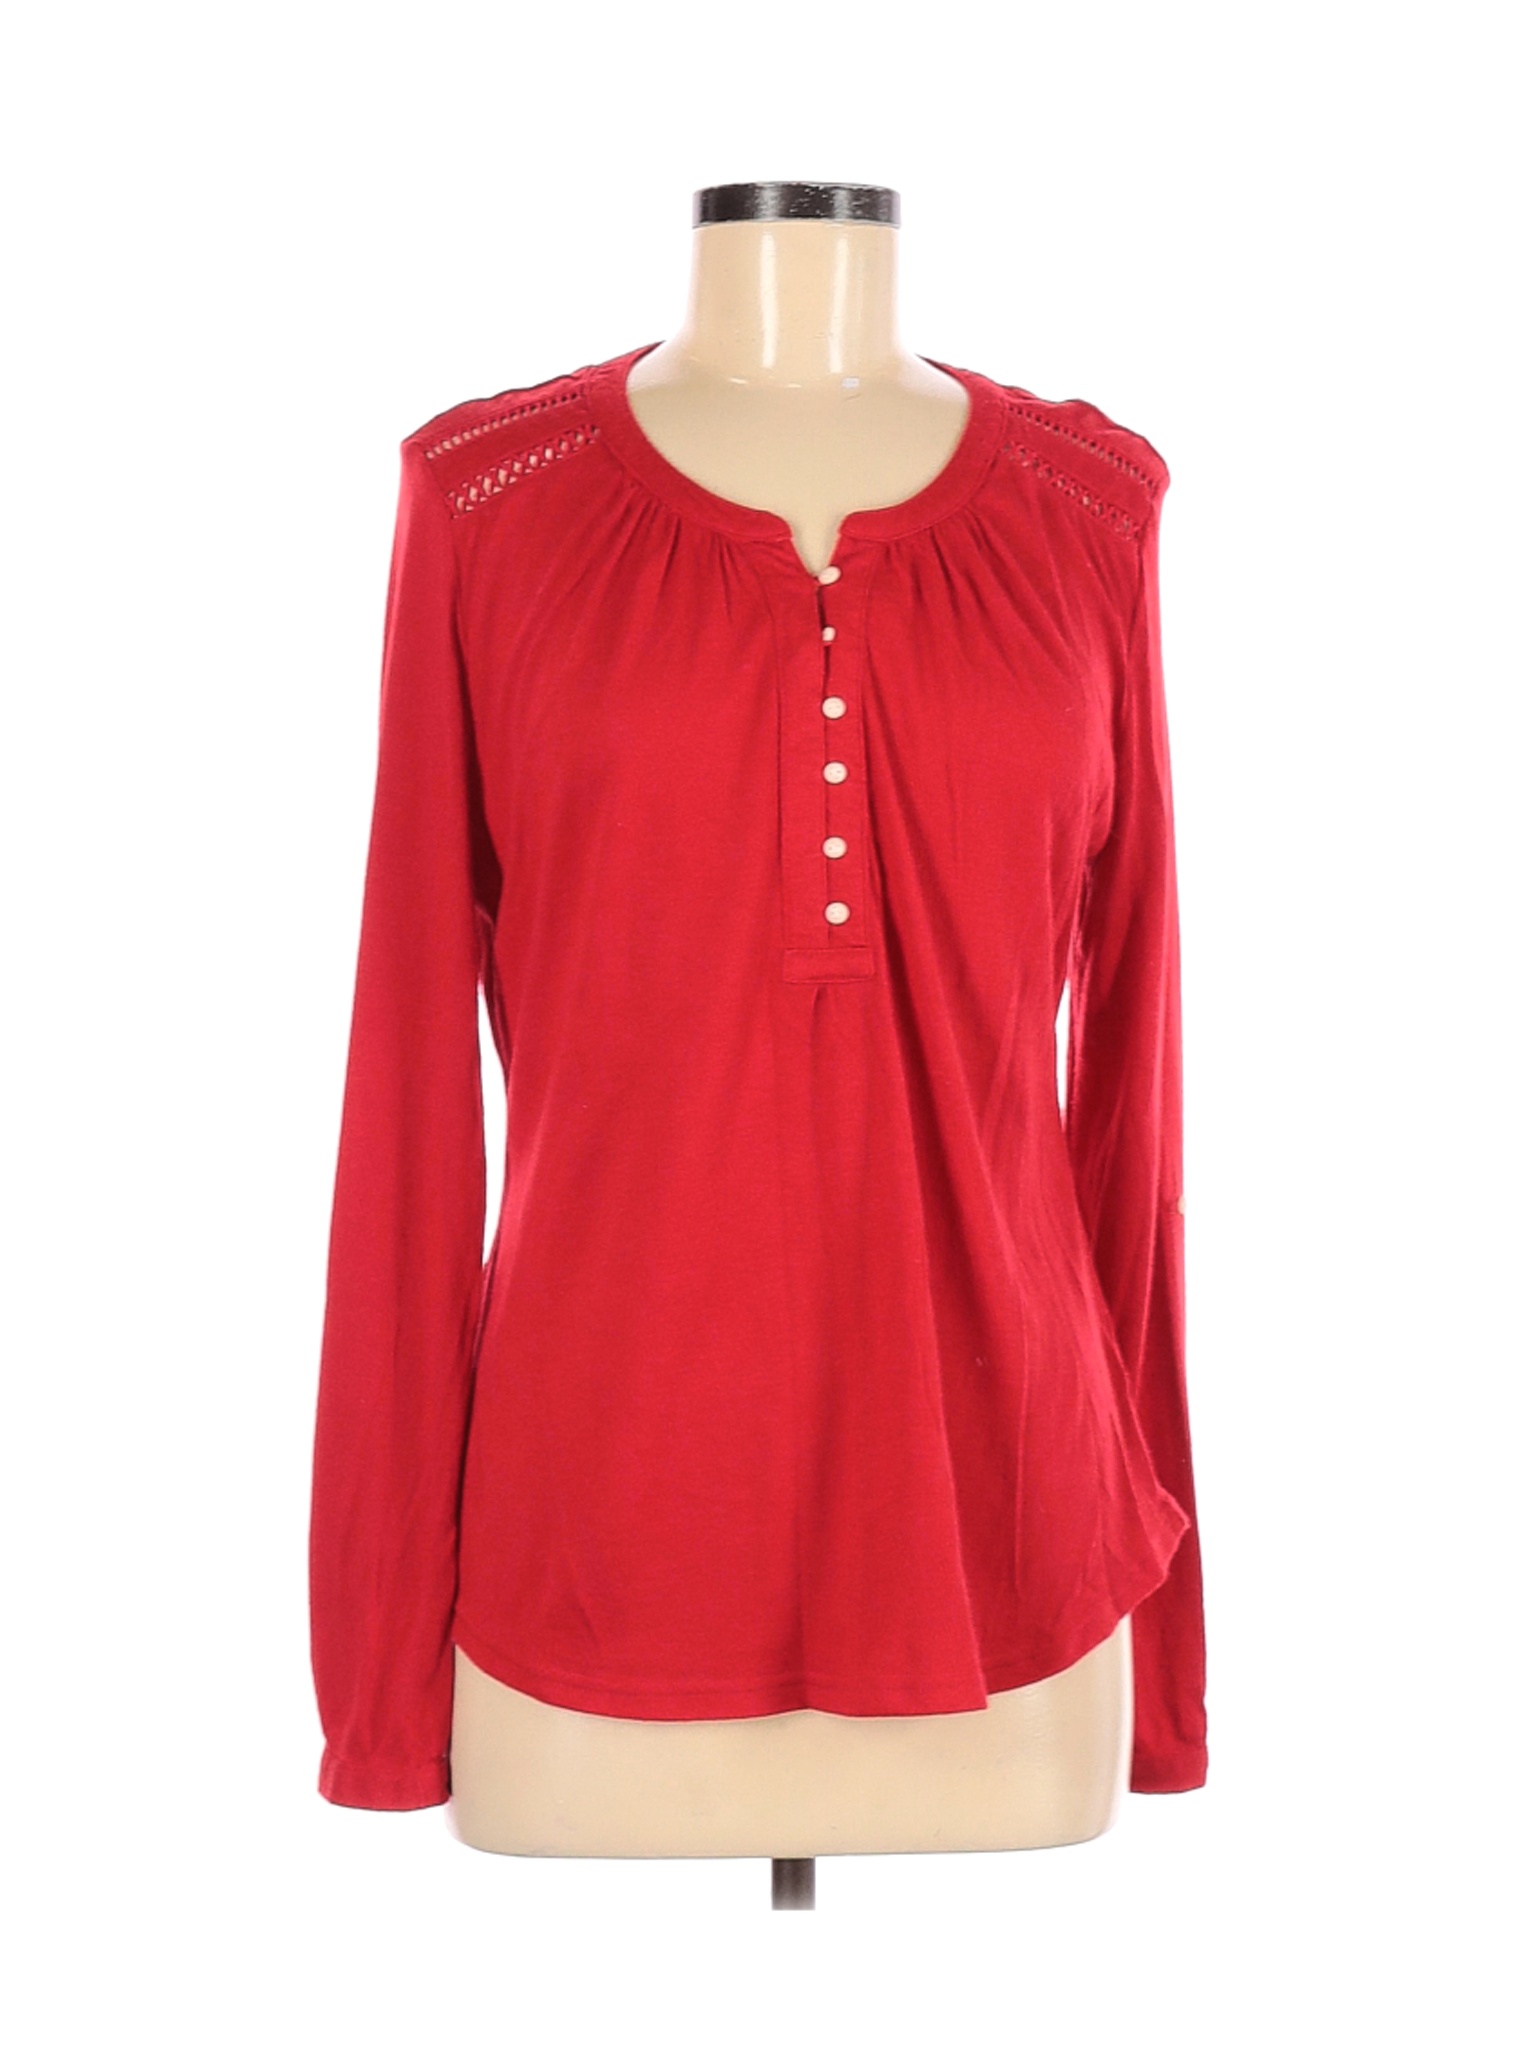 Market and Spruce Women Red Long Sleeve Top M | eBay